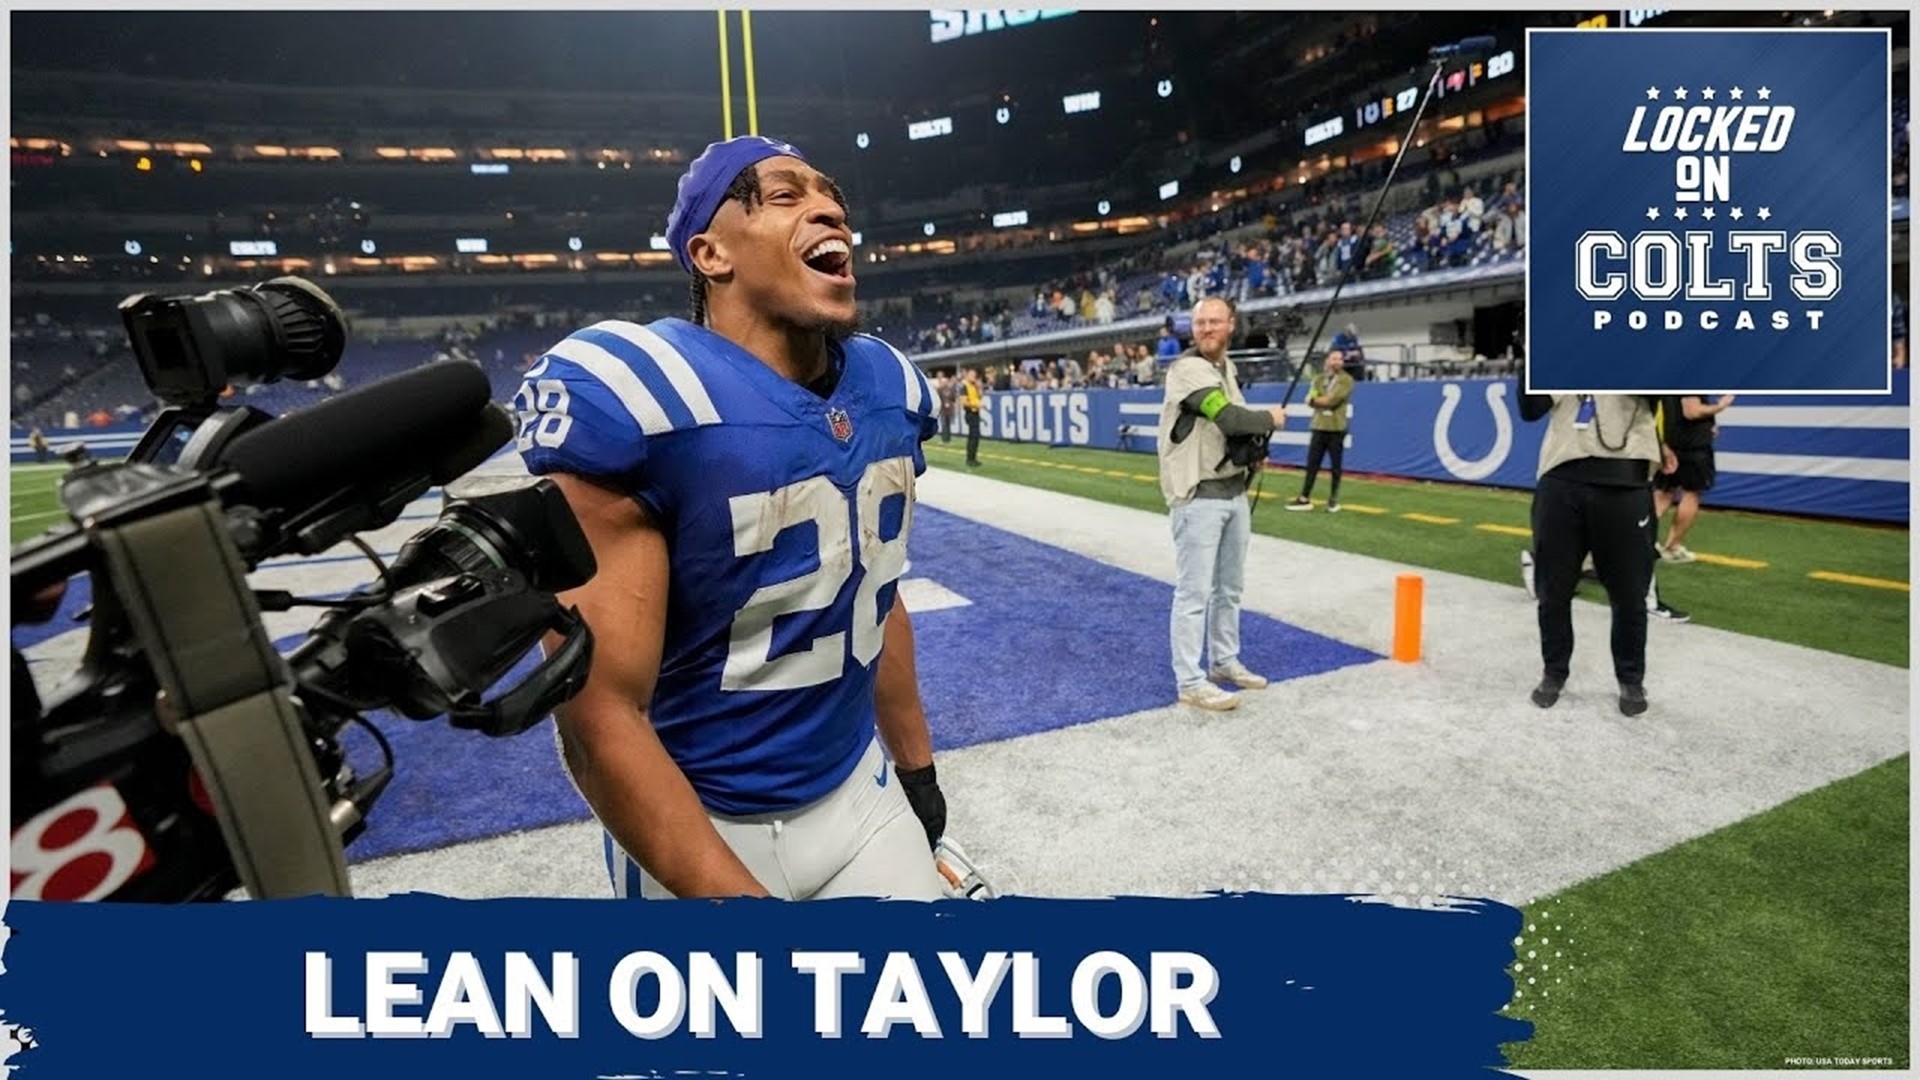 Indianapolis Colts stars Michael Pittman Jr and Jonathan Taylor carried the team to victory on Sunday over the Tampa Bay Buccaneers.